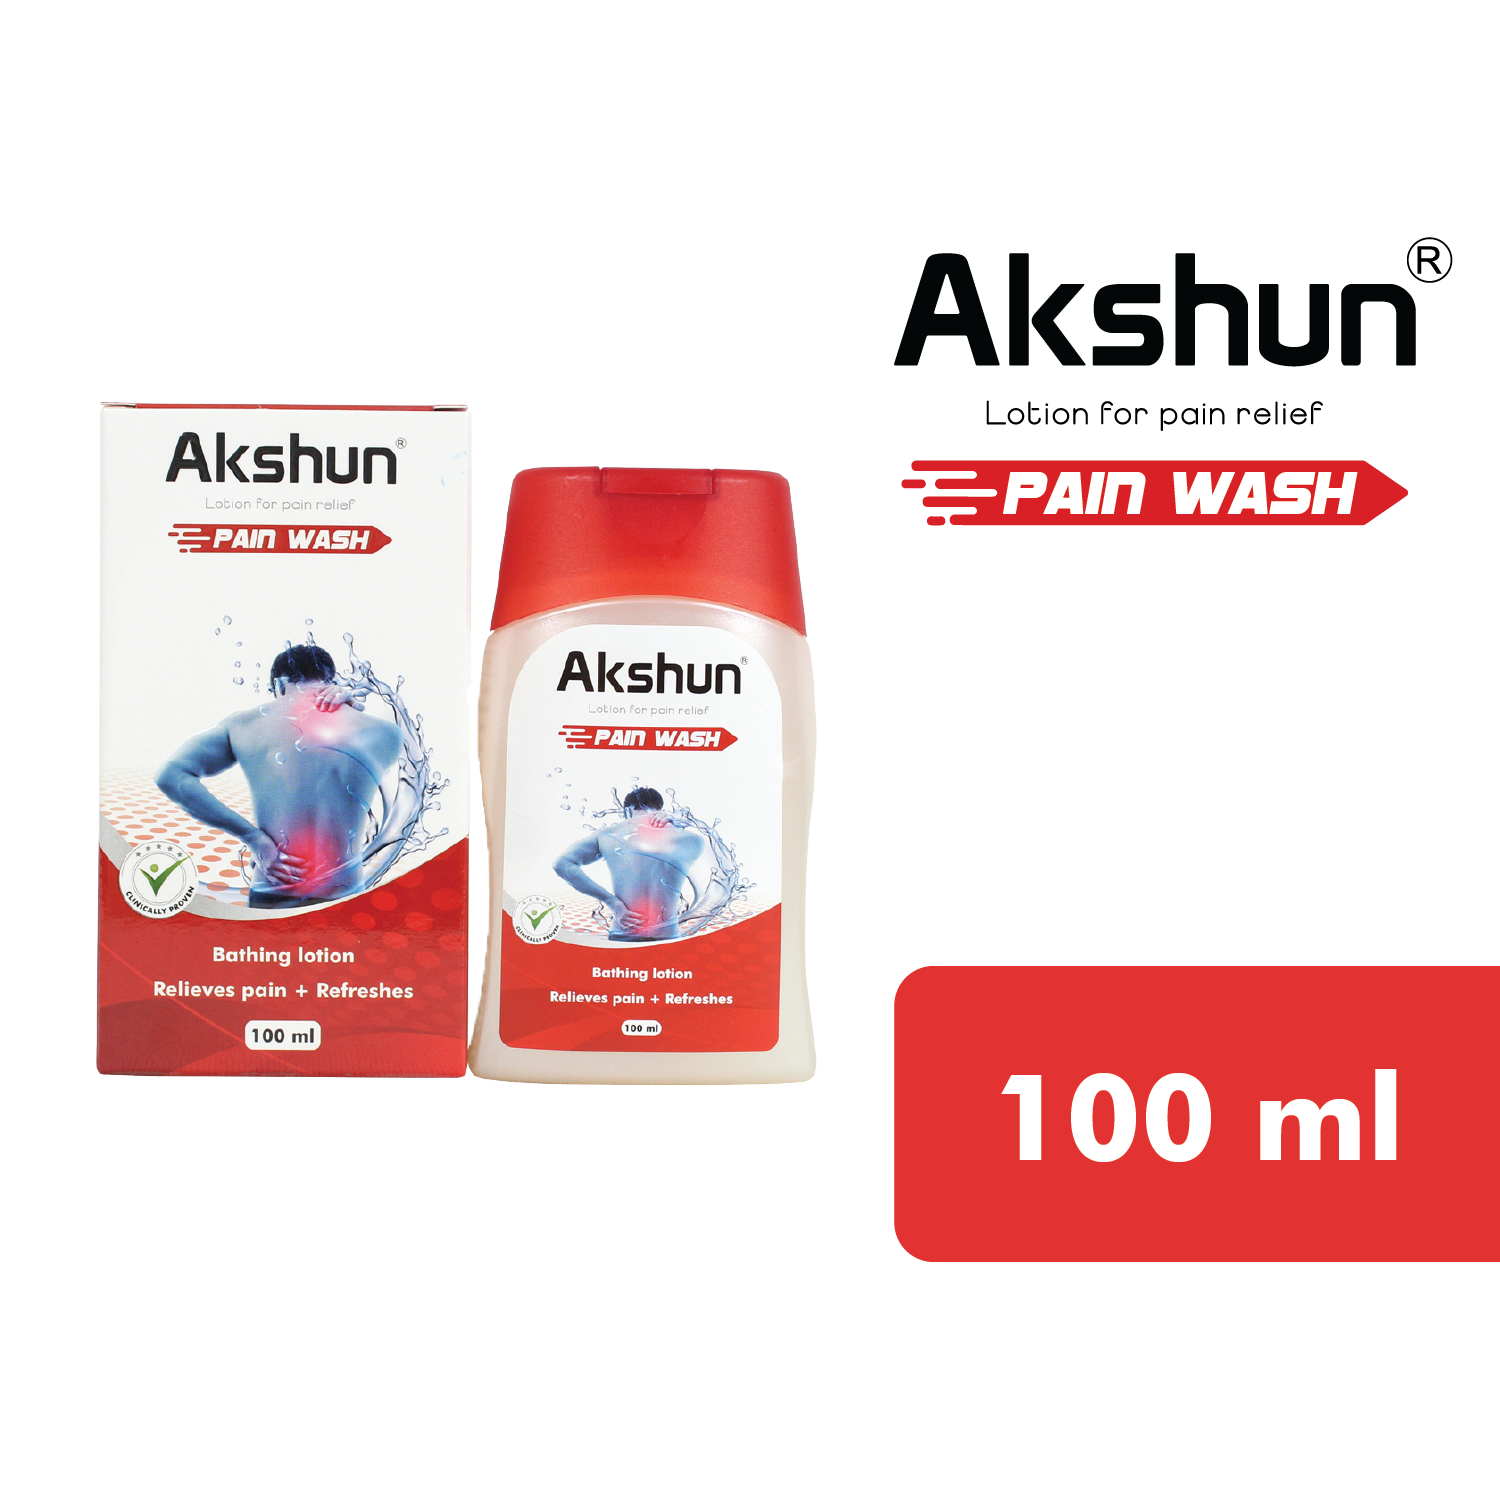 akshun lotion for pain relief